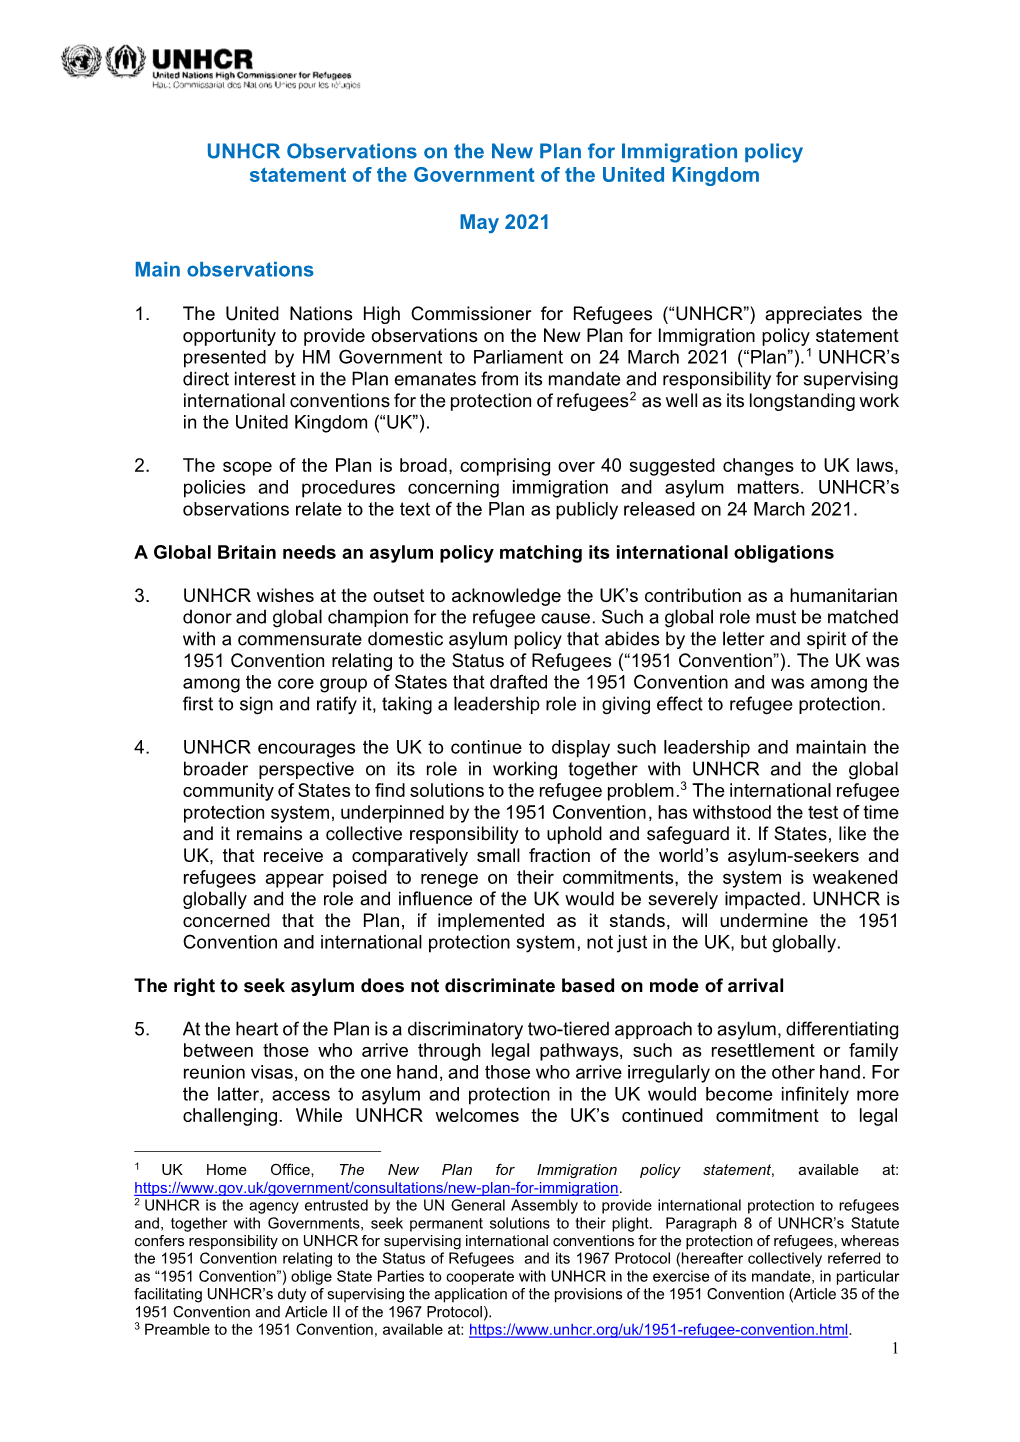 UNHCR Observations on the New Plan for Immigration Policy Statement of the Government of the United Kingdom